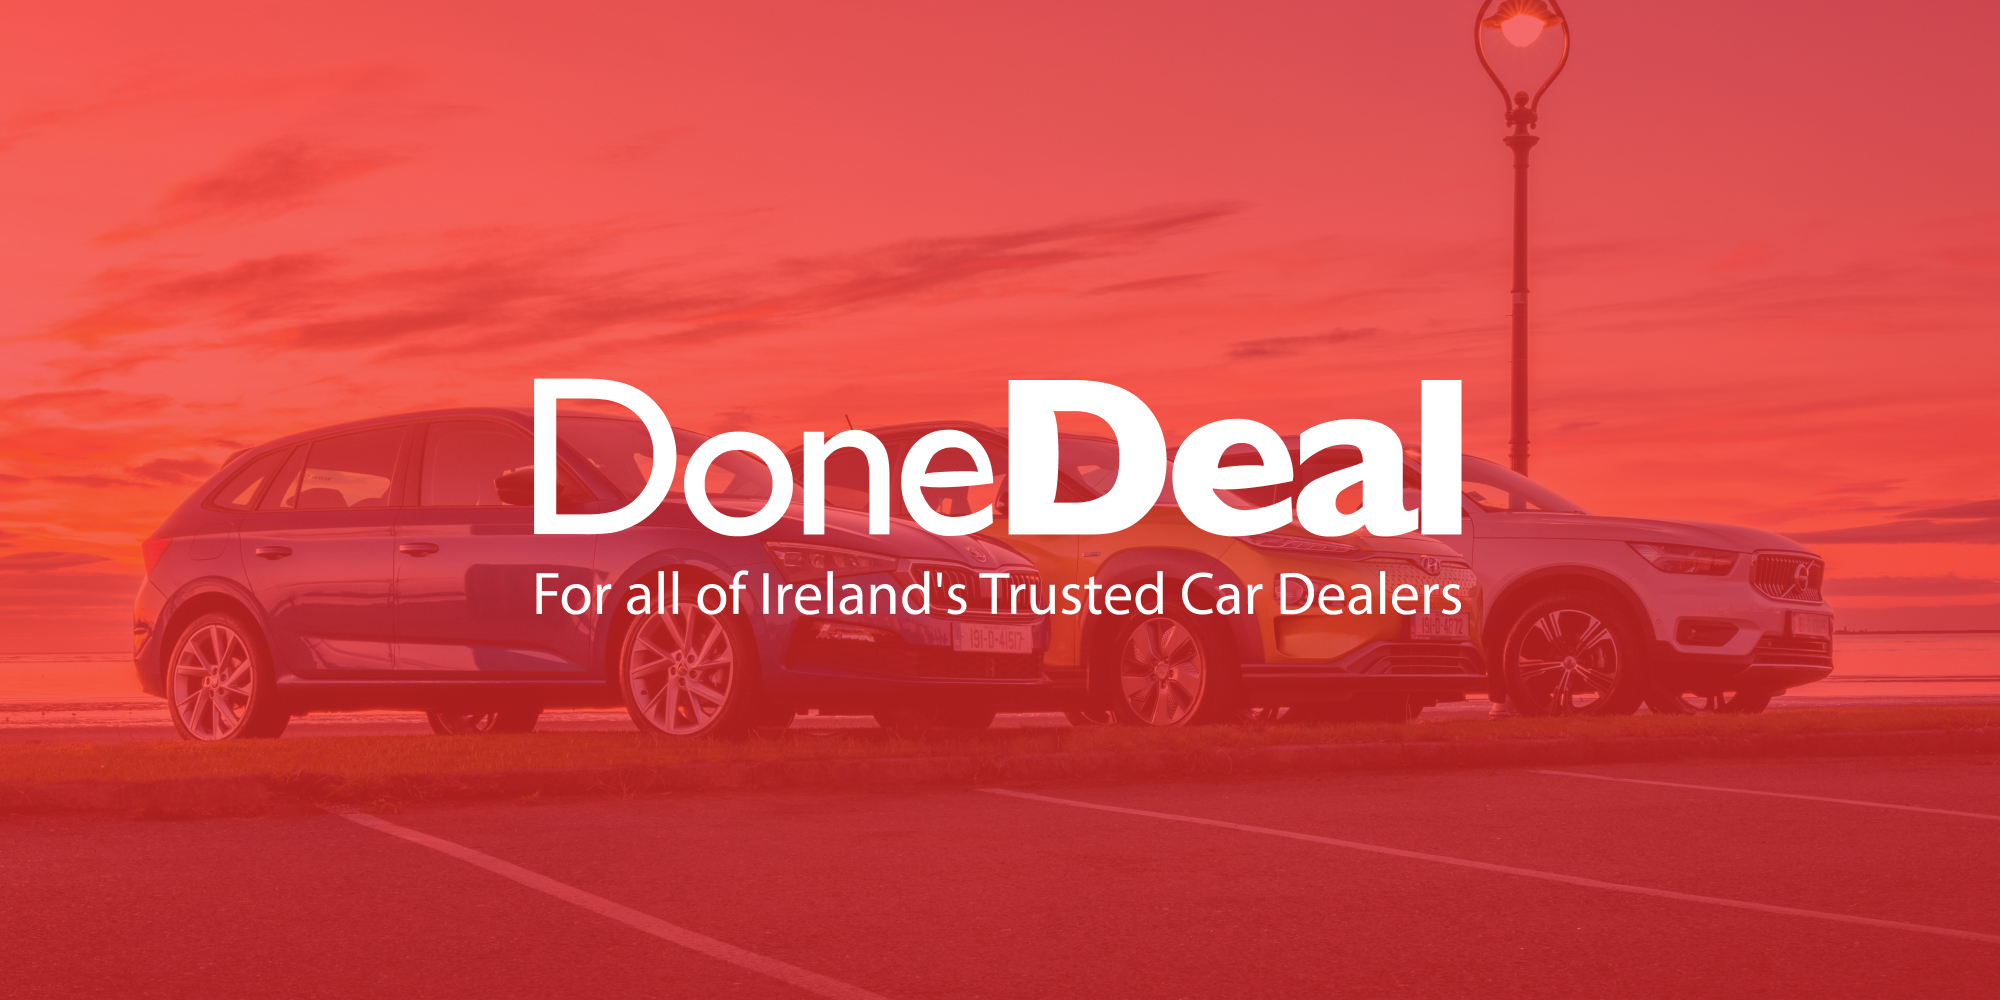 (c) Donedeal.co.uk